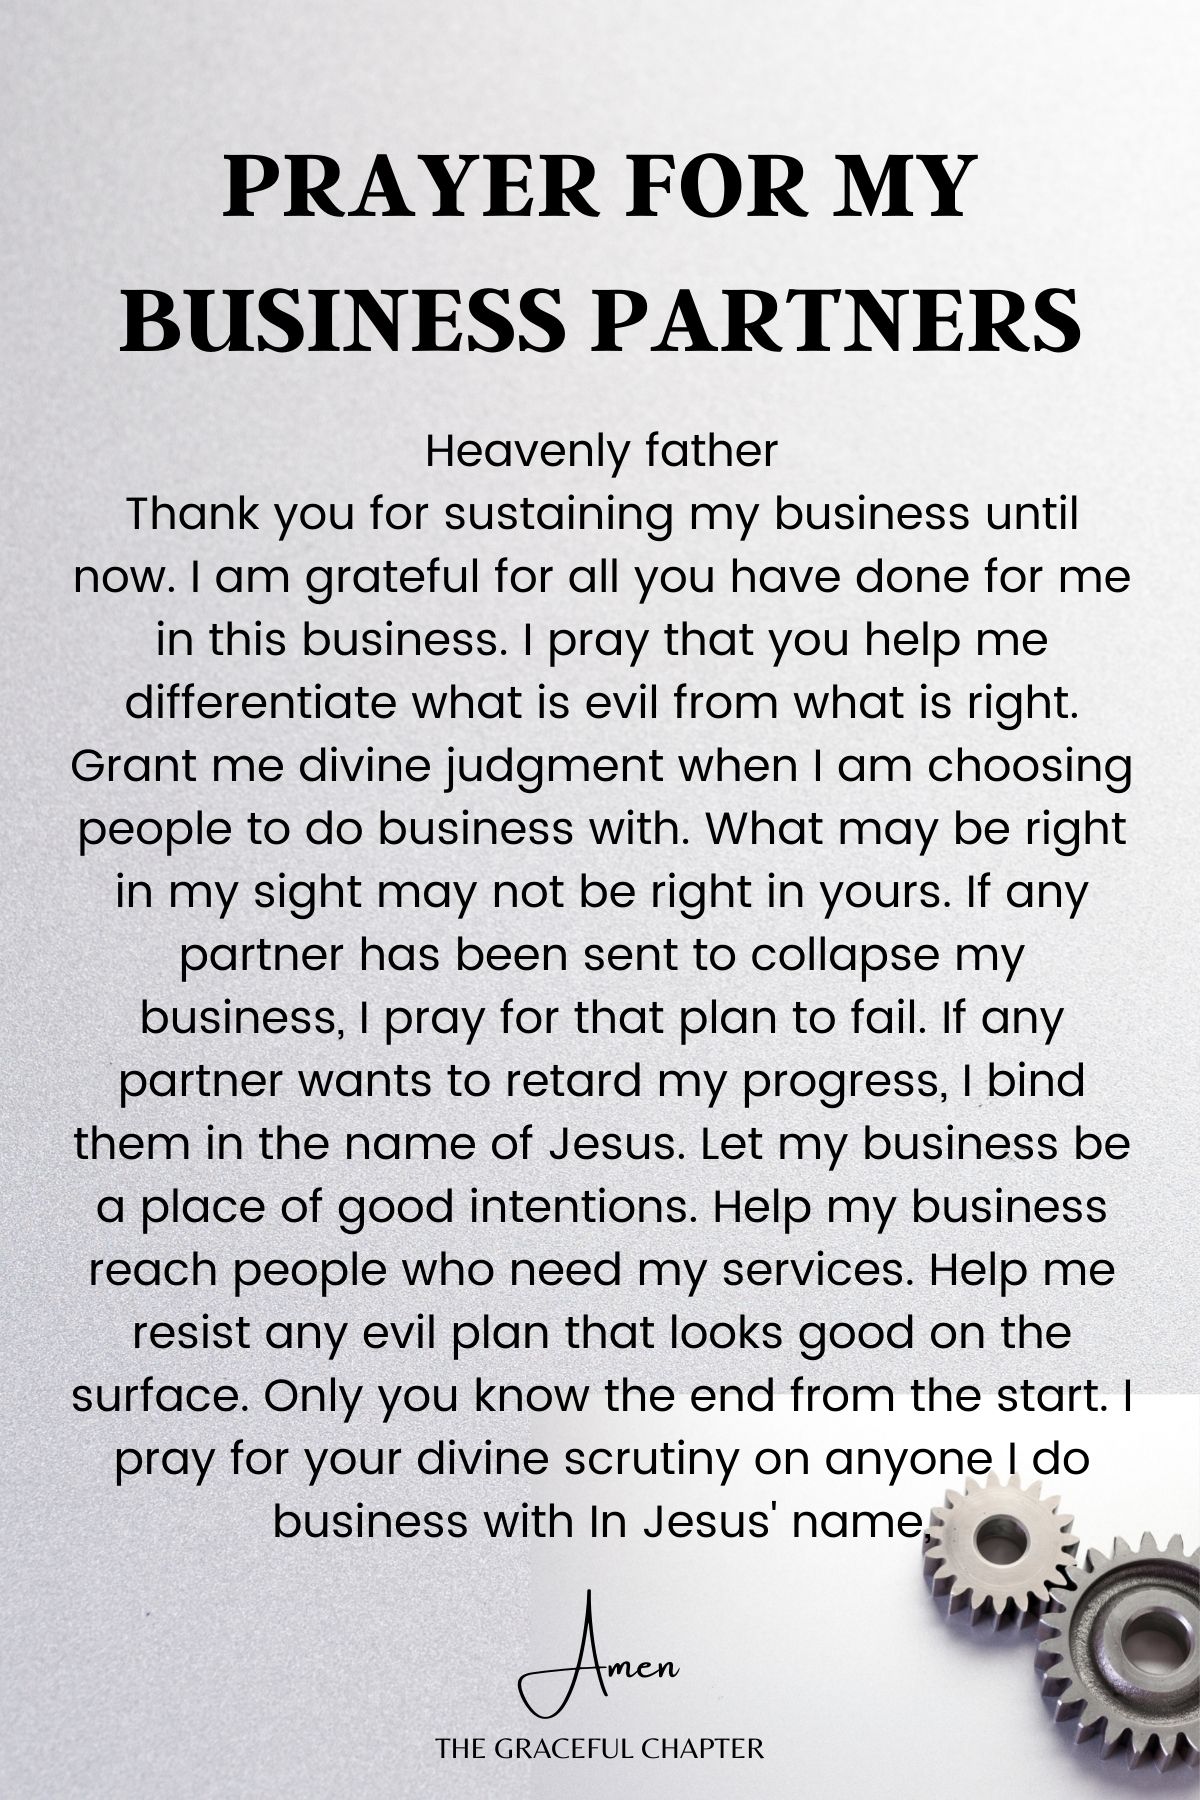 Prayer for your business partners